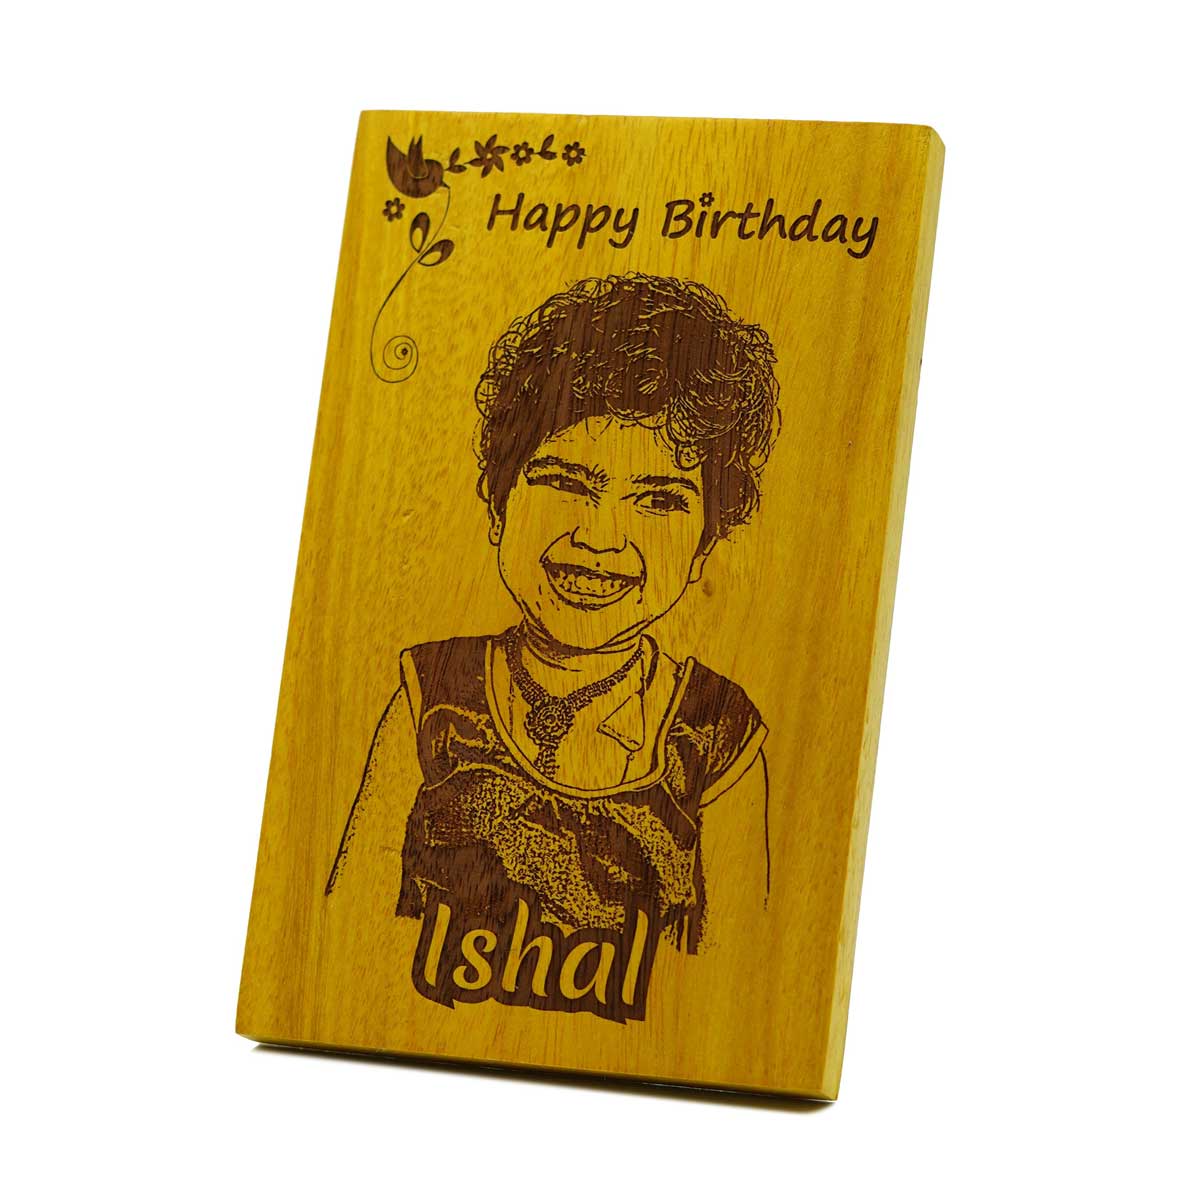 Personalized Engraved Wooden Birthday Gift Photo Plaque for Him or Her (12  x 9 inches) - Incredible Gifts